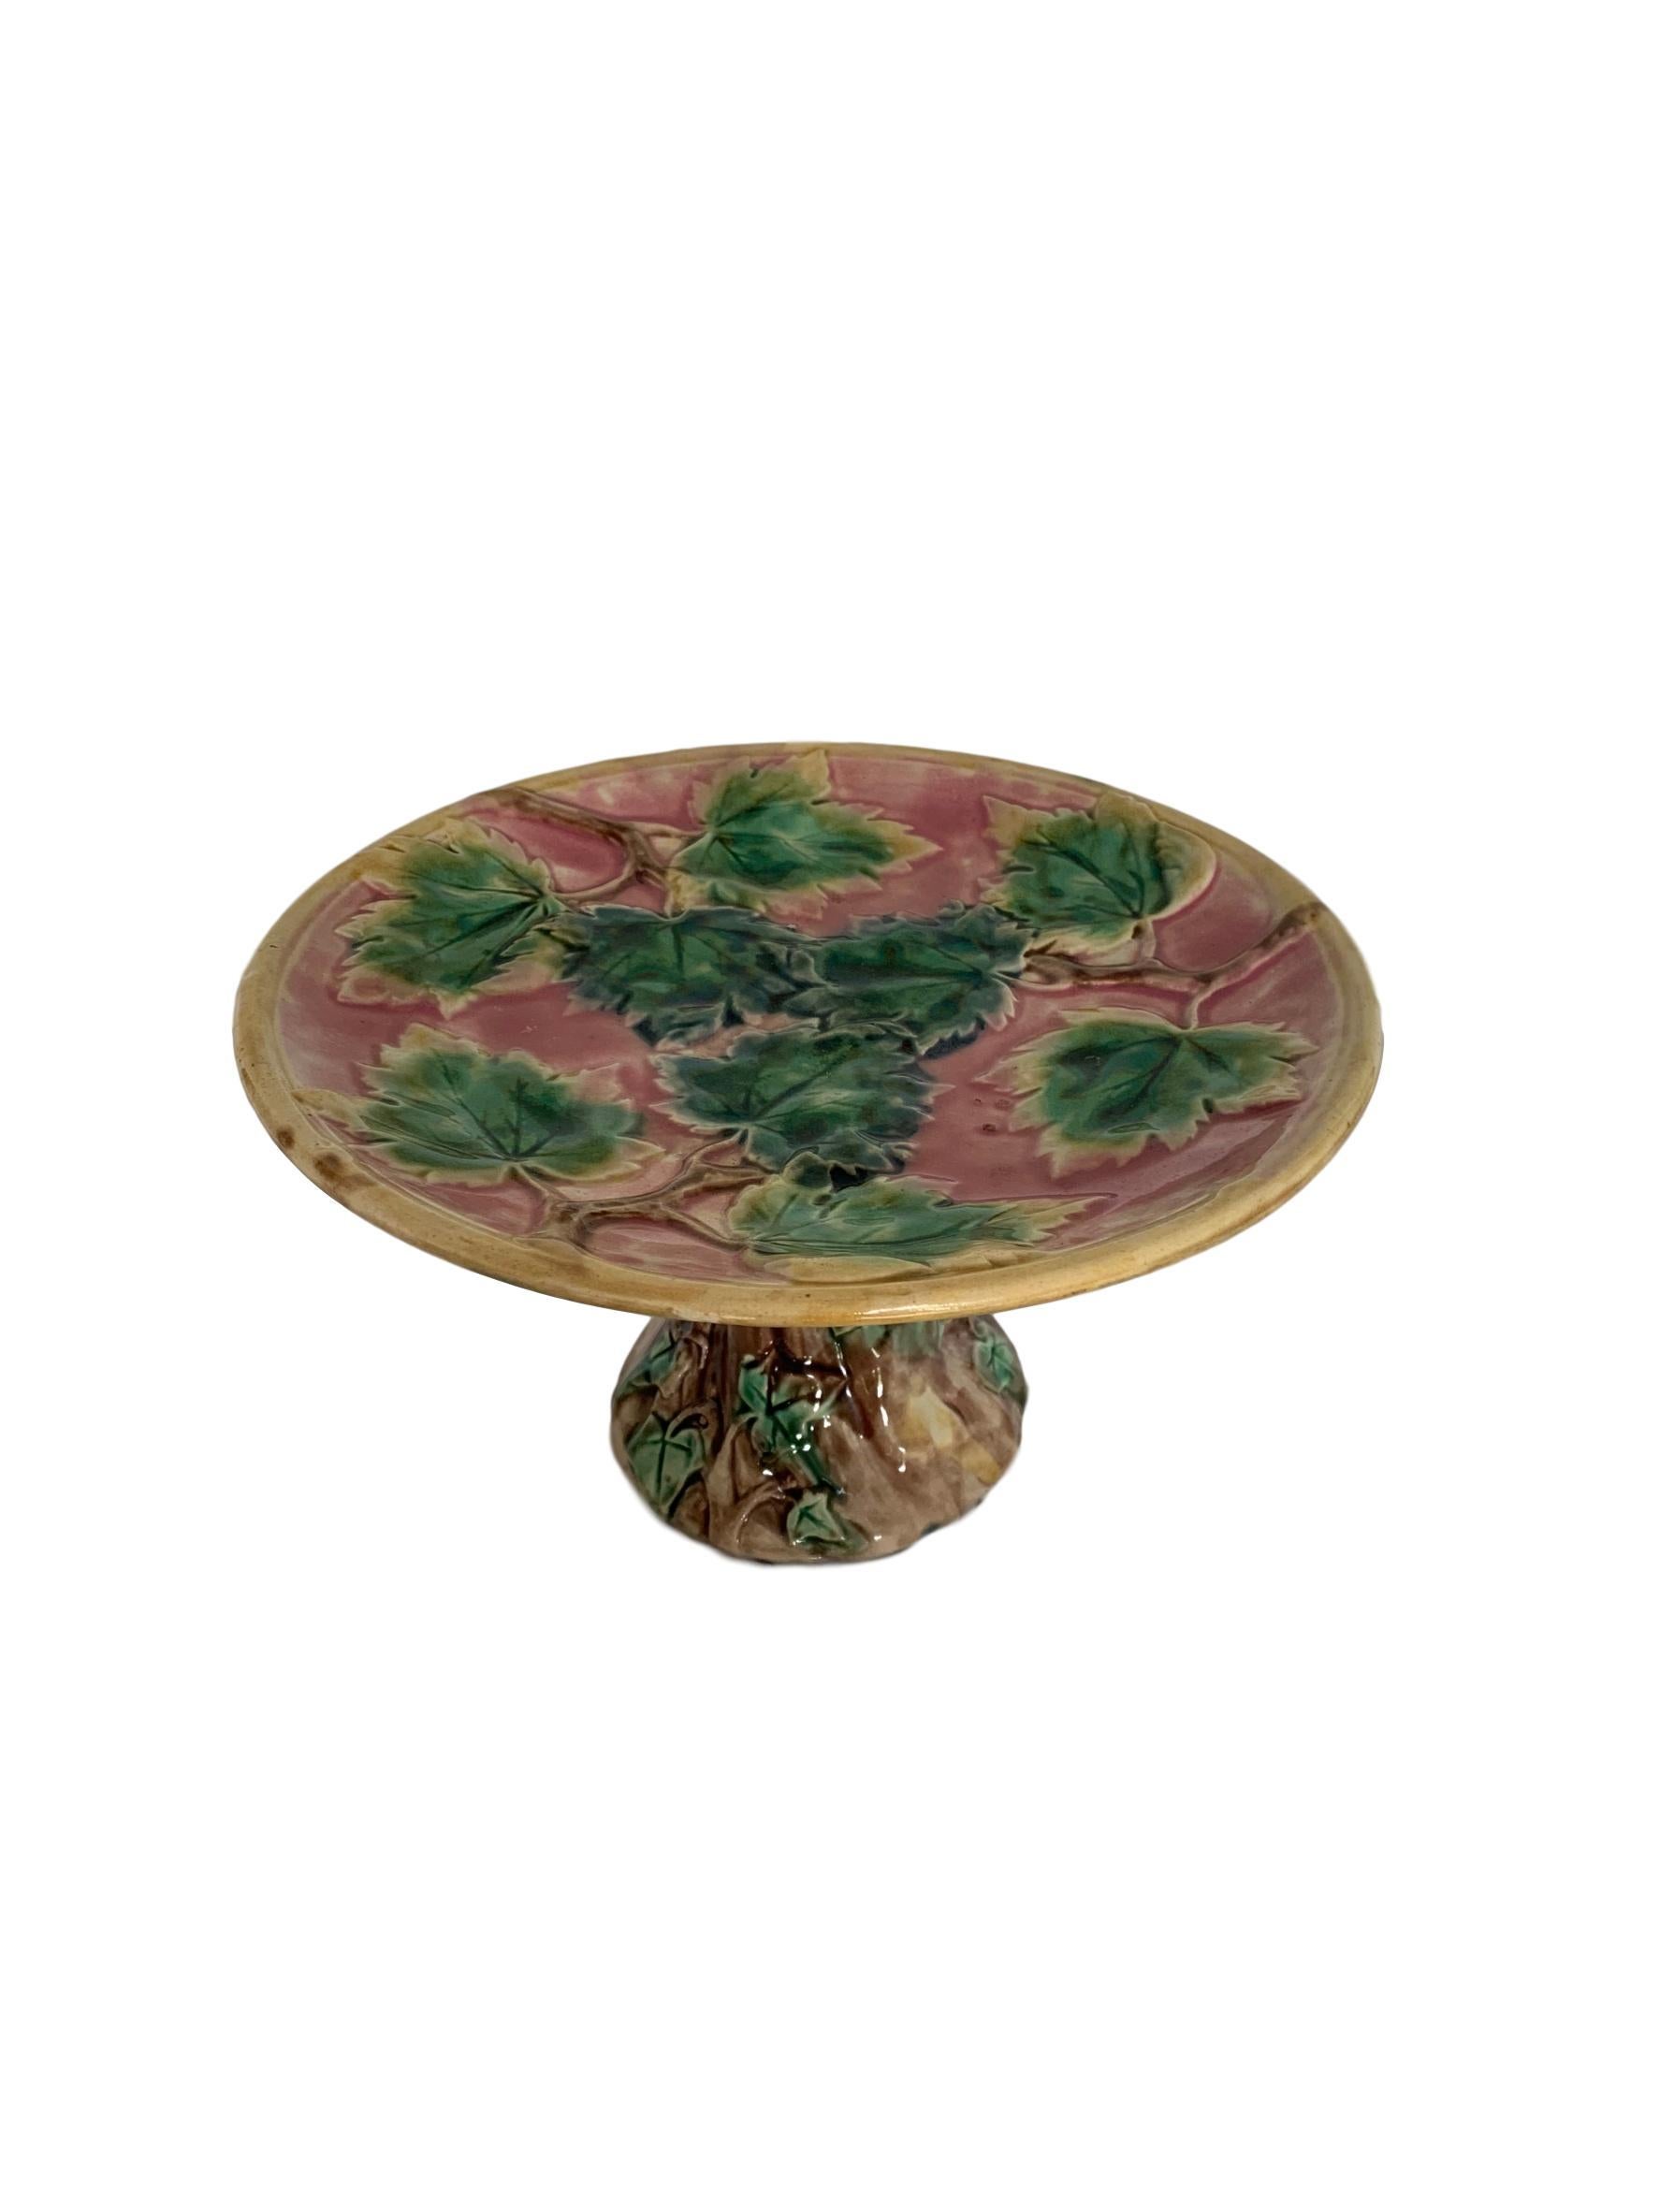 Victorian Etruscan Majolica Maple Leaf Compote on Pink Ground, by Griffin, Smith & Hill